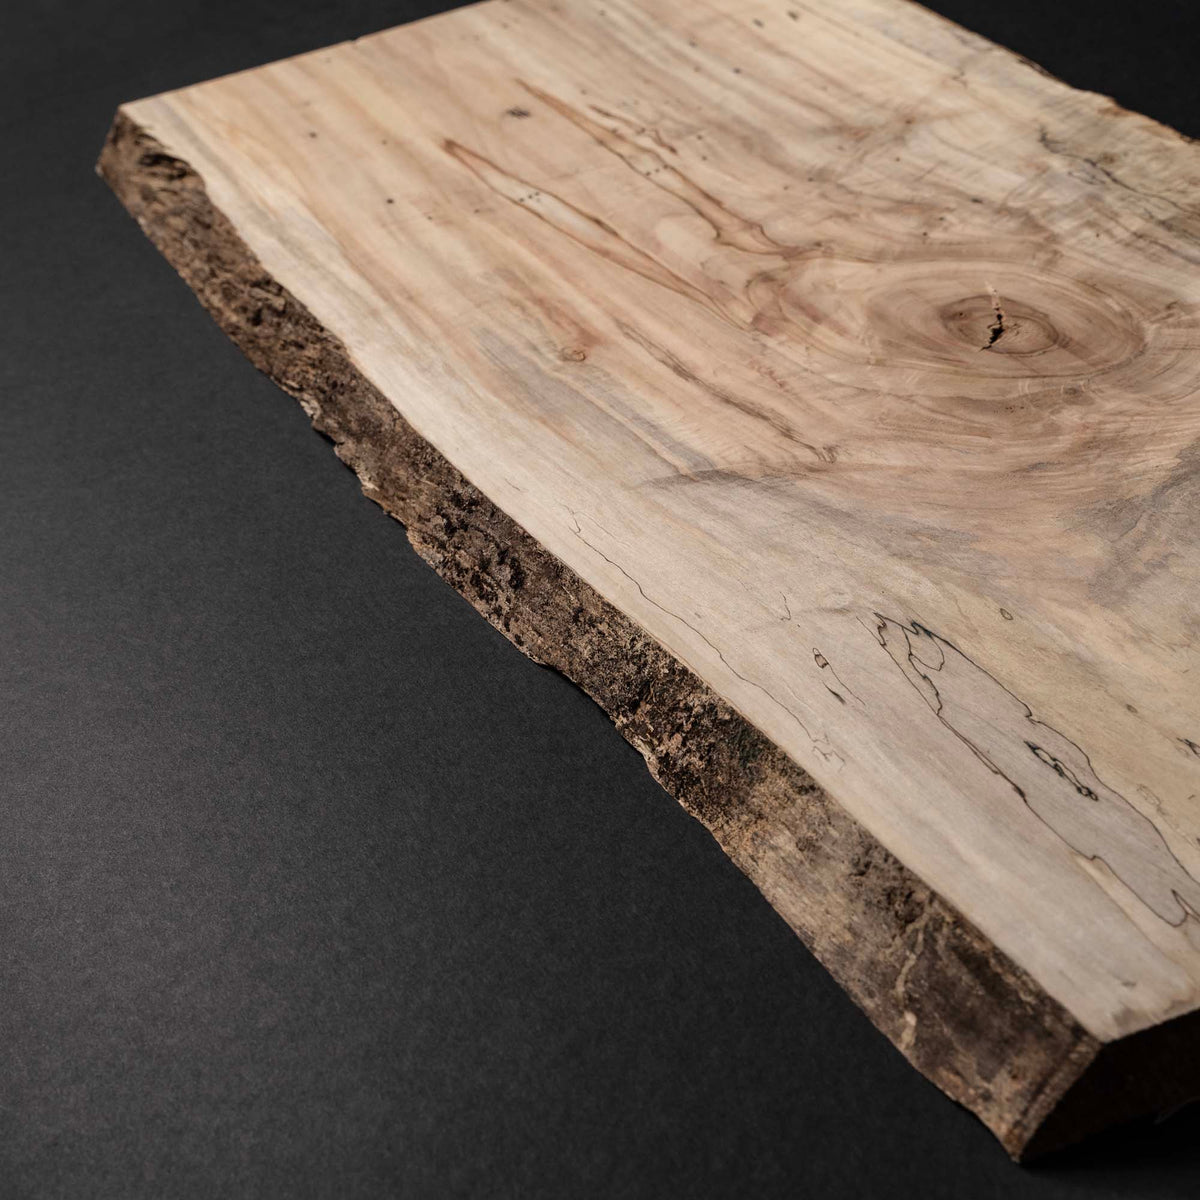 4/4 1” Live Edge Spalted Hard Maple Wood Boards - Kiln Dried - Dimensional Lumber - Cut To Size Board - DIY Wood Project Boards